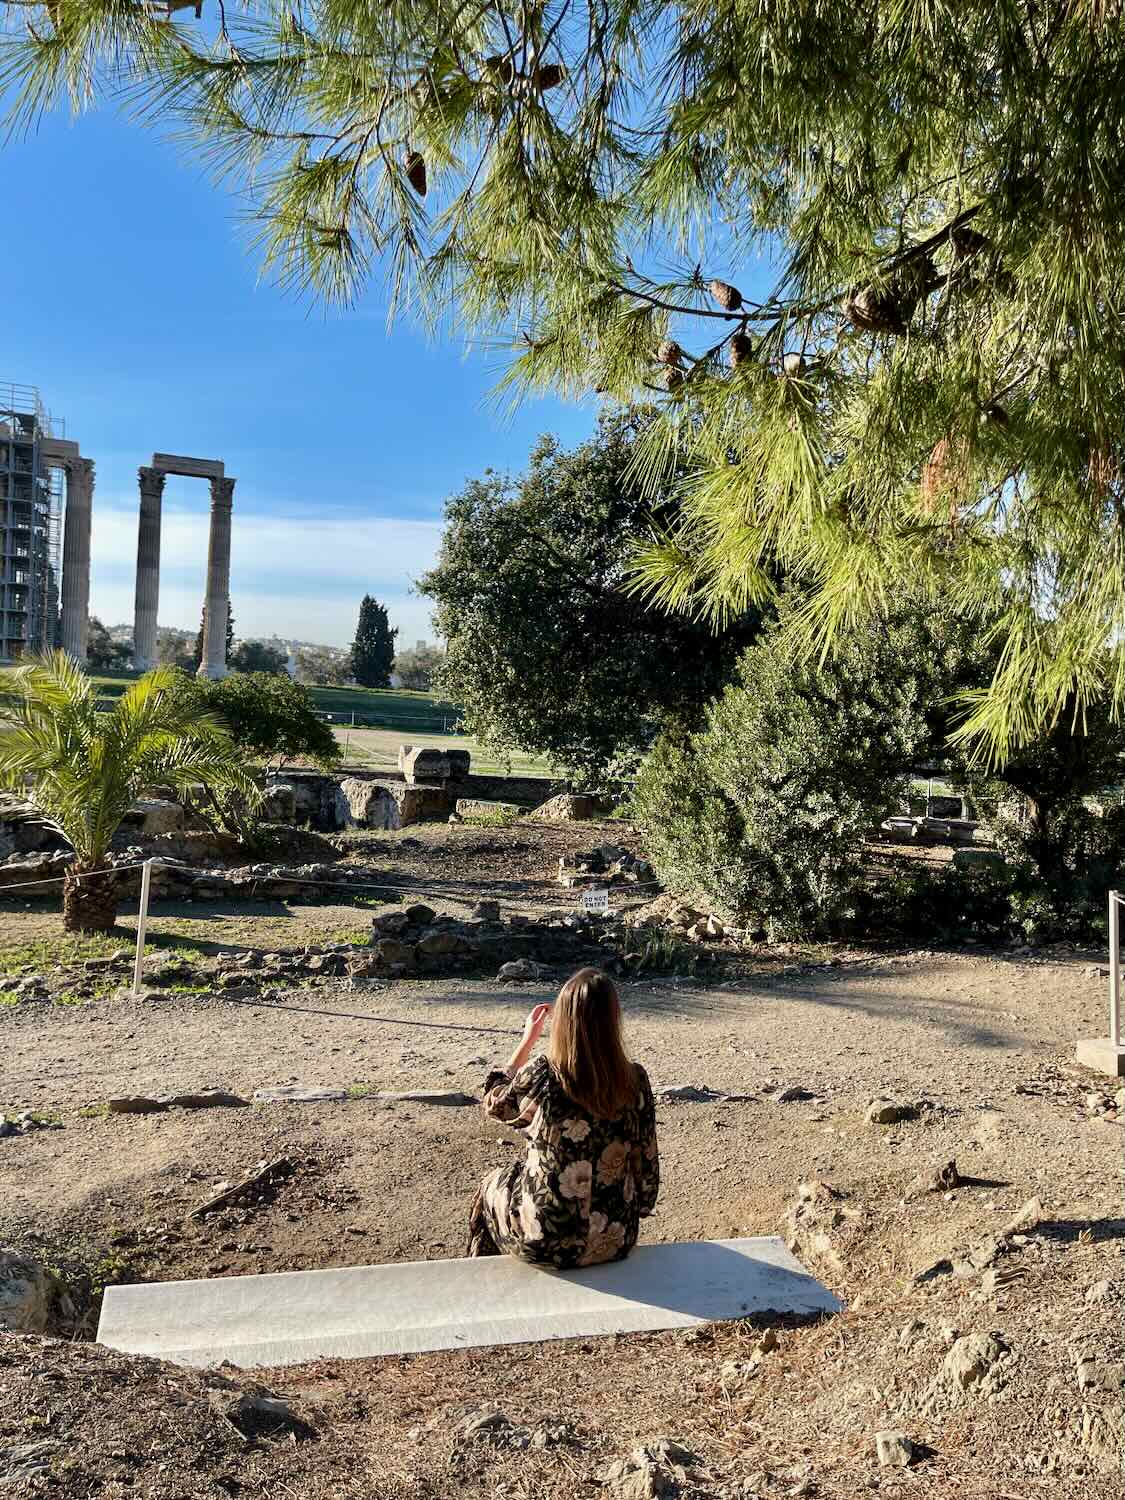 A woman sitting on a stone bench, photographing the ruins of the Temple of Olympian Zeus in Athens. The scene is framed by pine trees and greenery under a clear blue sky.